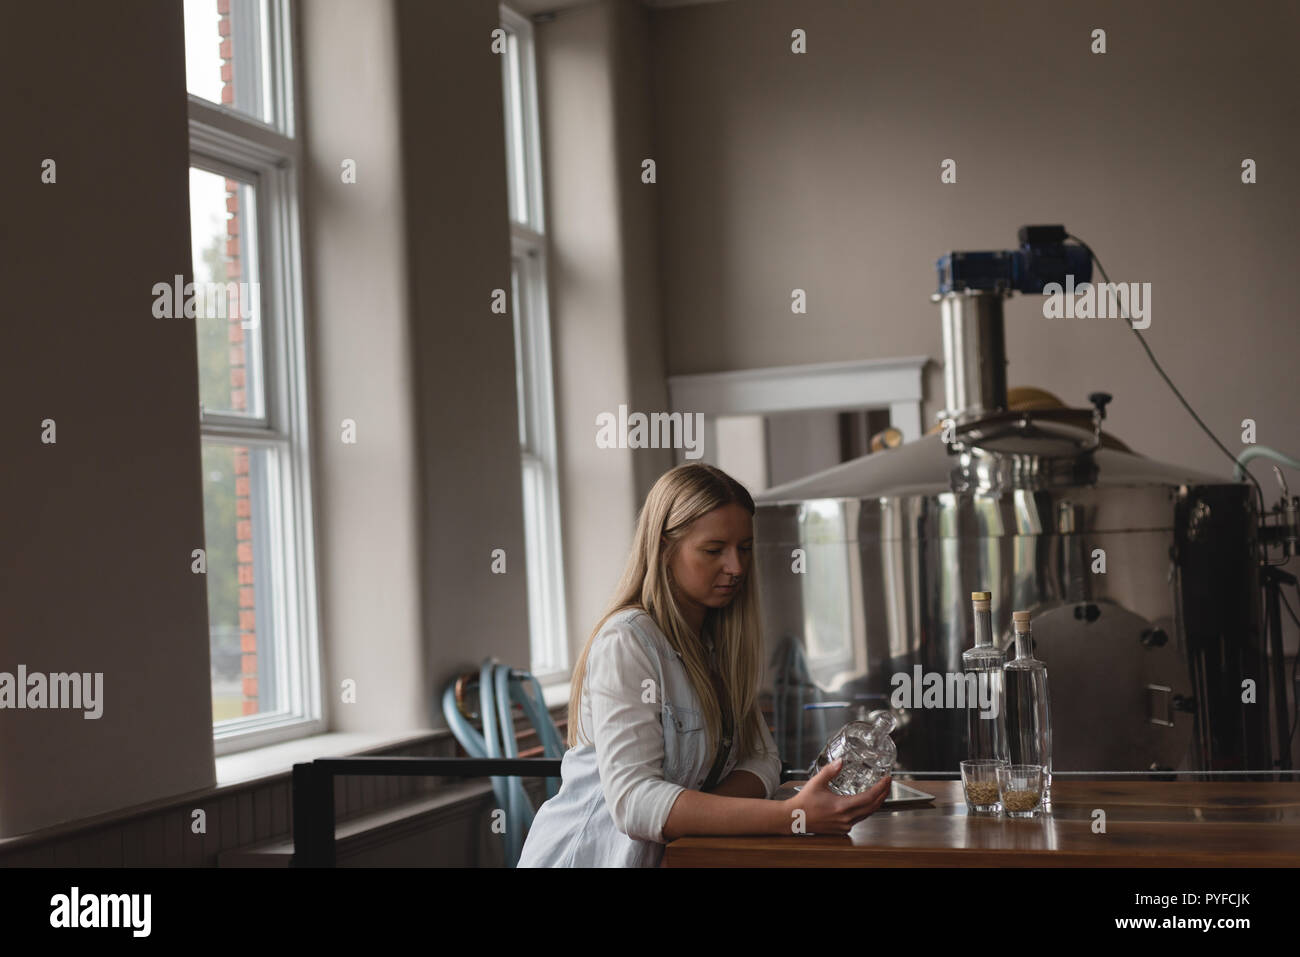 Female worker examining a bottle in factory Stock Photo